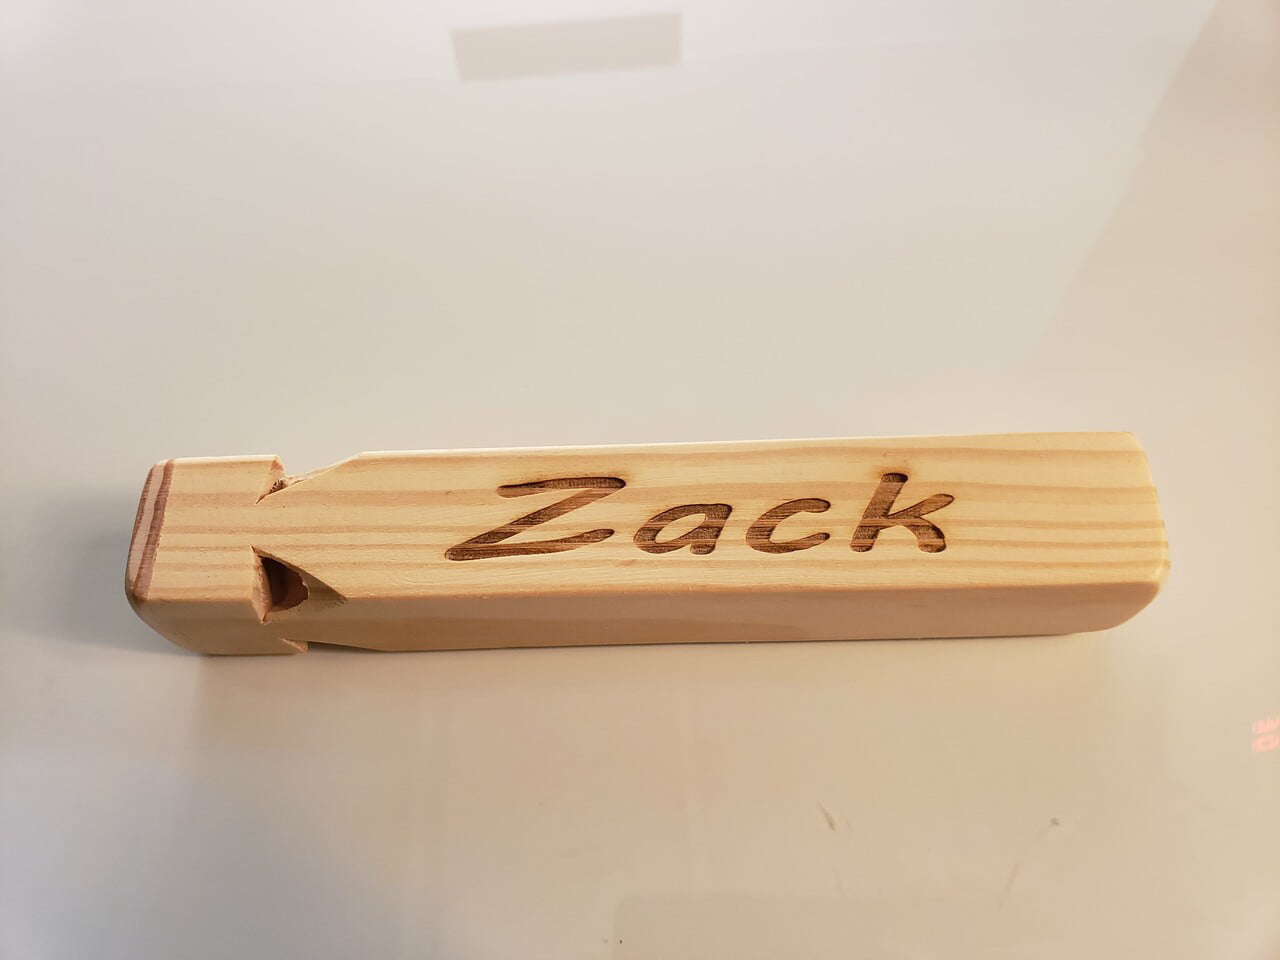 Personalized 4 tone Wooden Train Whistle